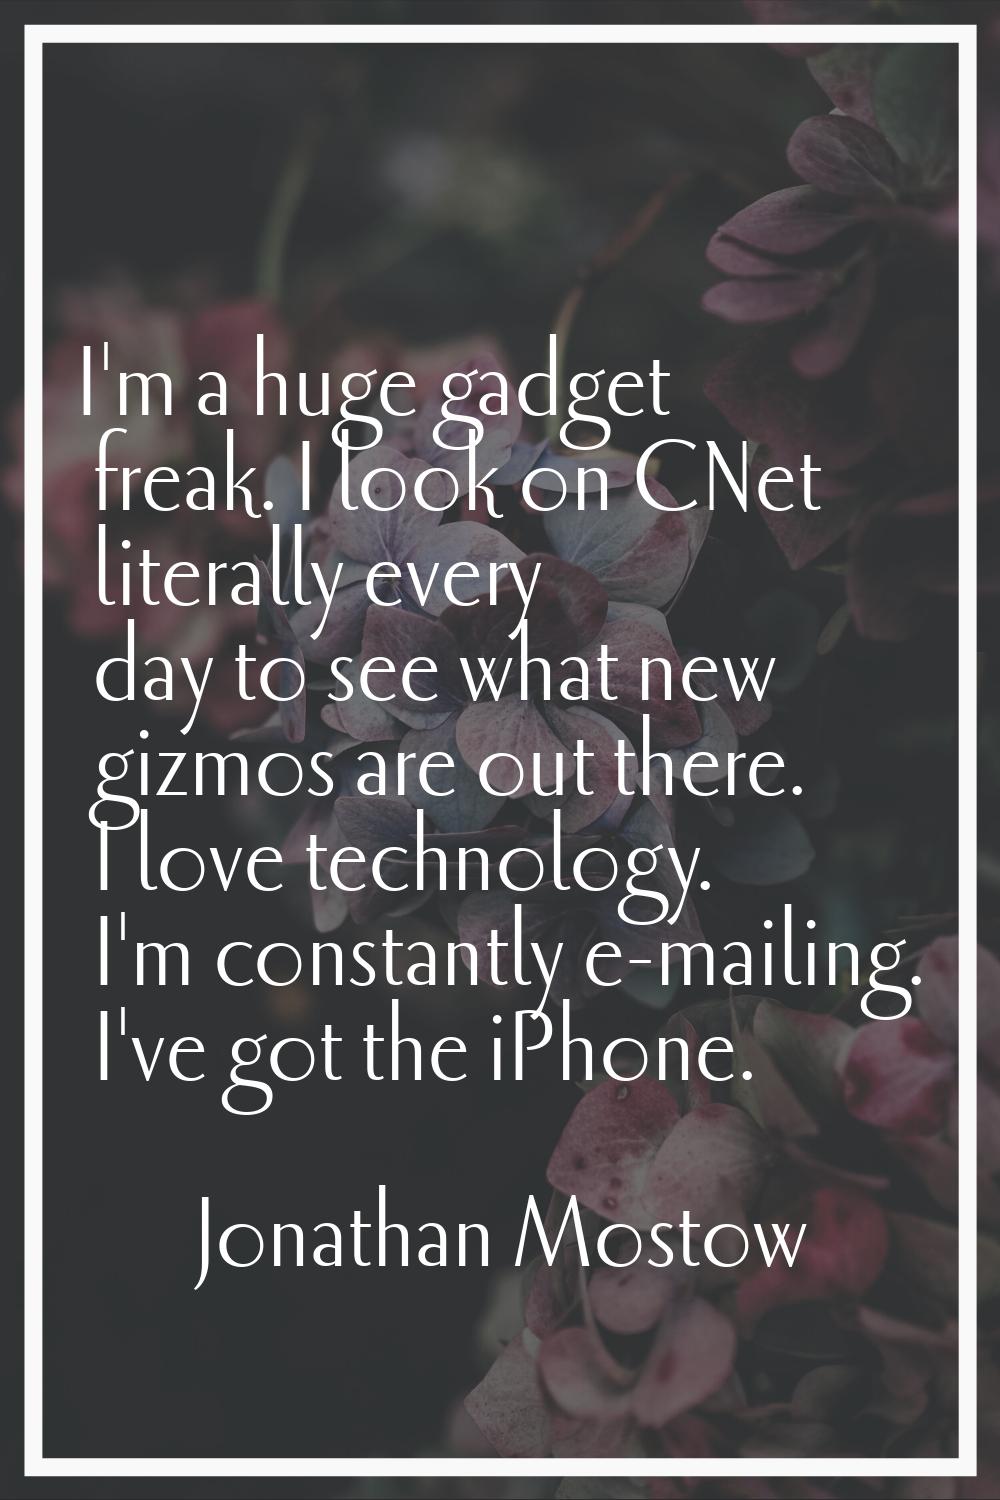 I'm a huge gadget freak. I look on CNet literally every day to see what new gizmos are out there. I